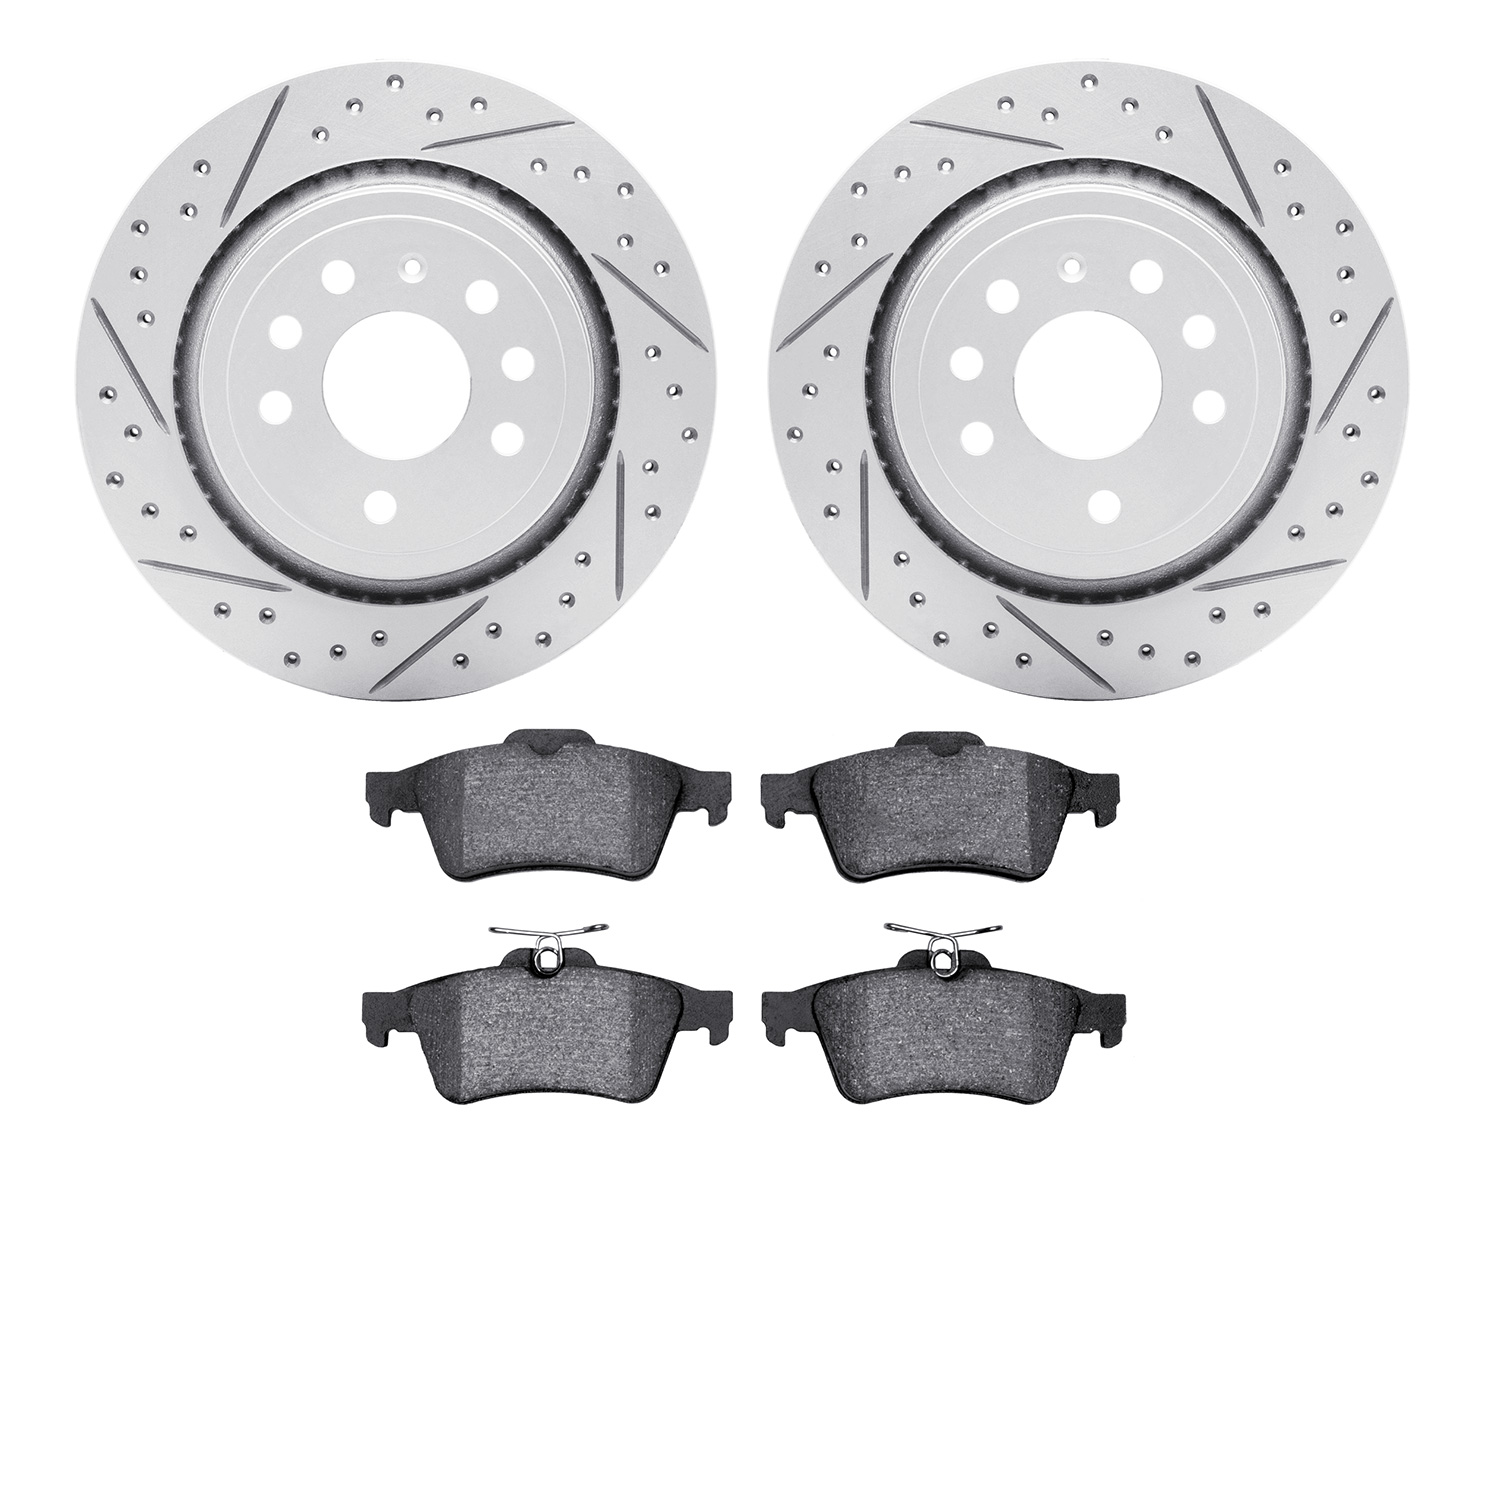 2502-65015 Geoperformance Drilled/Slotted Rotors w/5000 Advanced Brake Pads Kit, 2003-2011 GM, Position: Rear